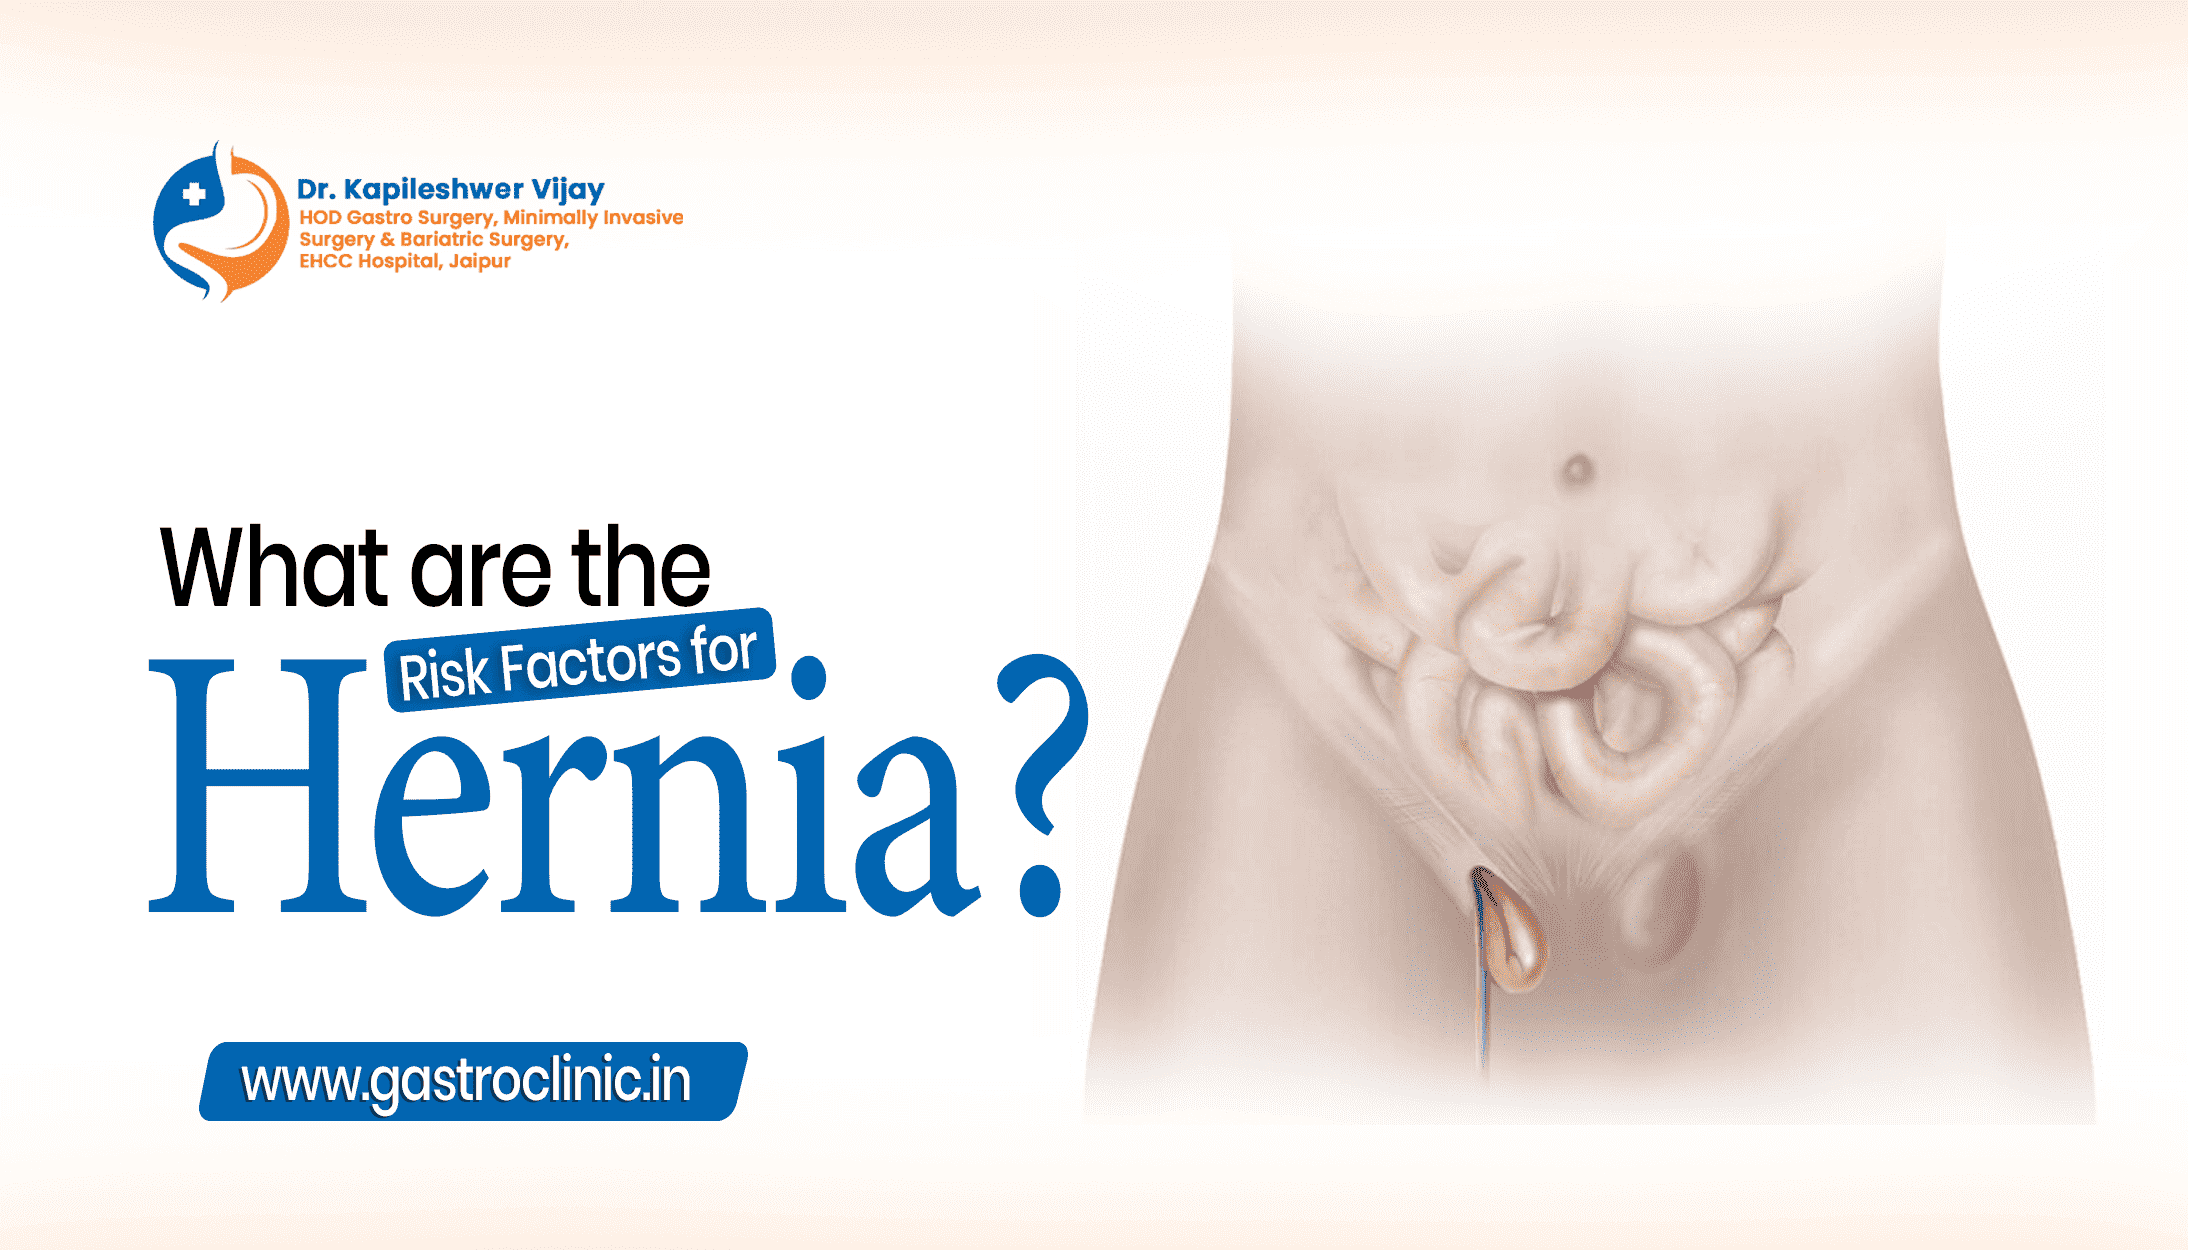 What are the Risk Factors for Hernia?